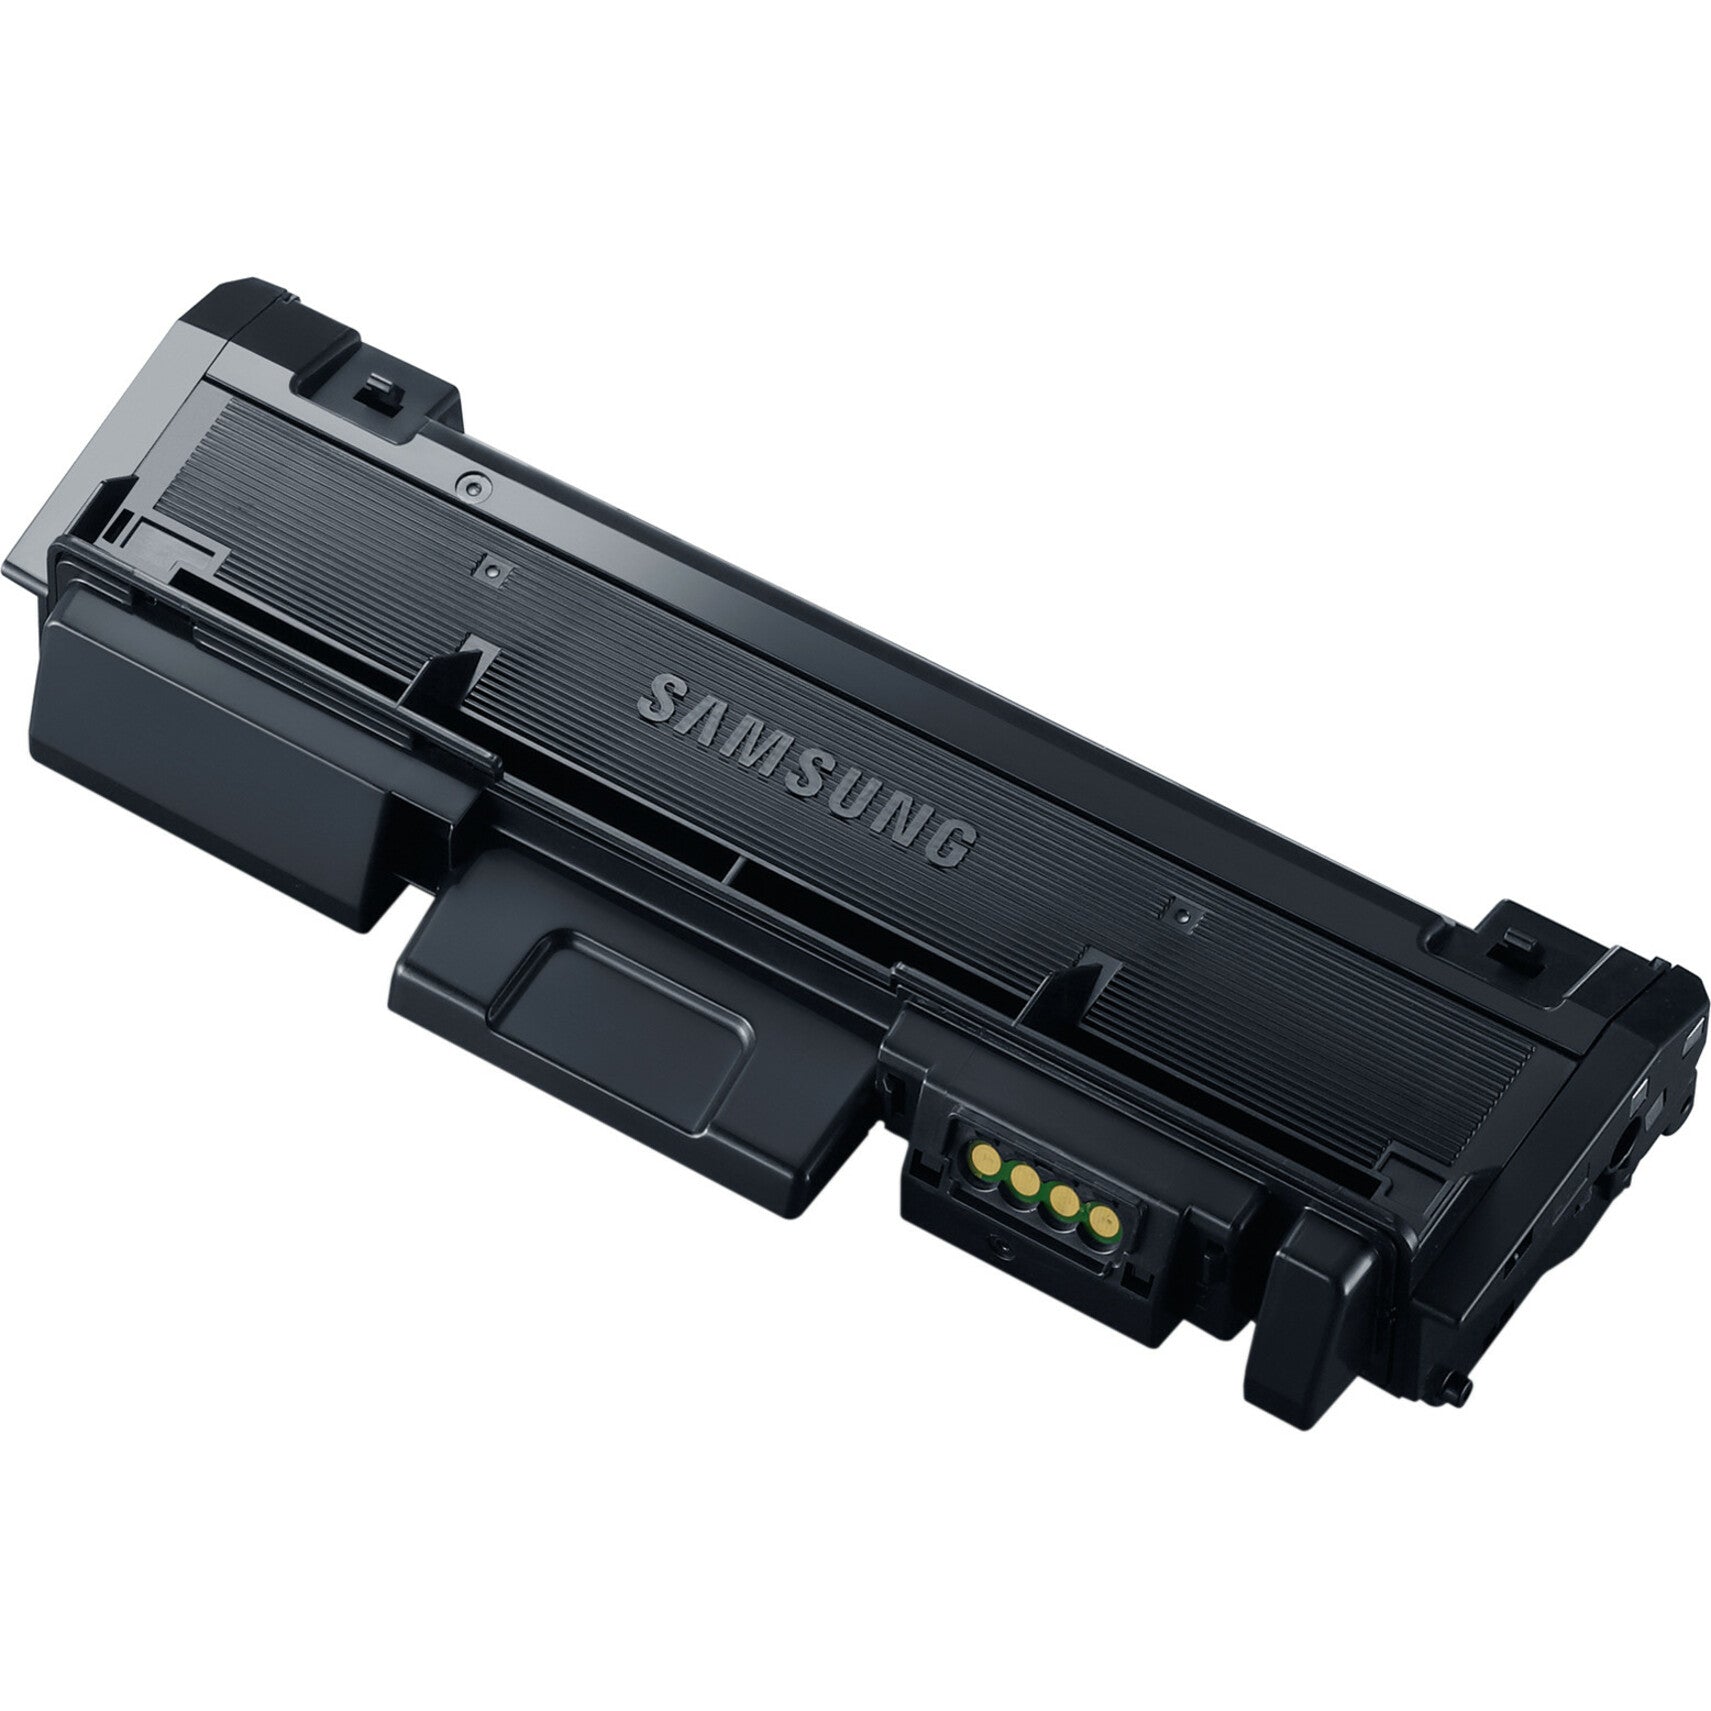 Samsung MLT-D116S/XAA MLT-D116S Mono Toner Cartridge, 1200 Pages Yield